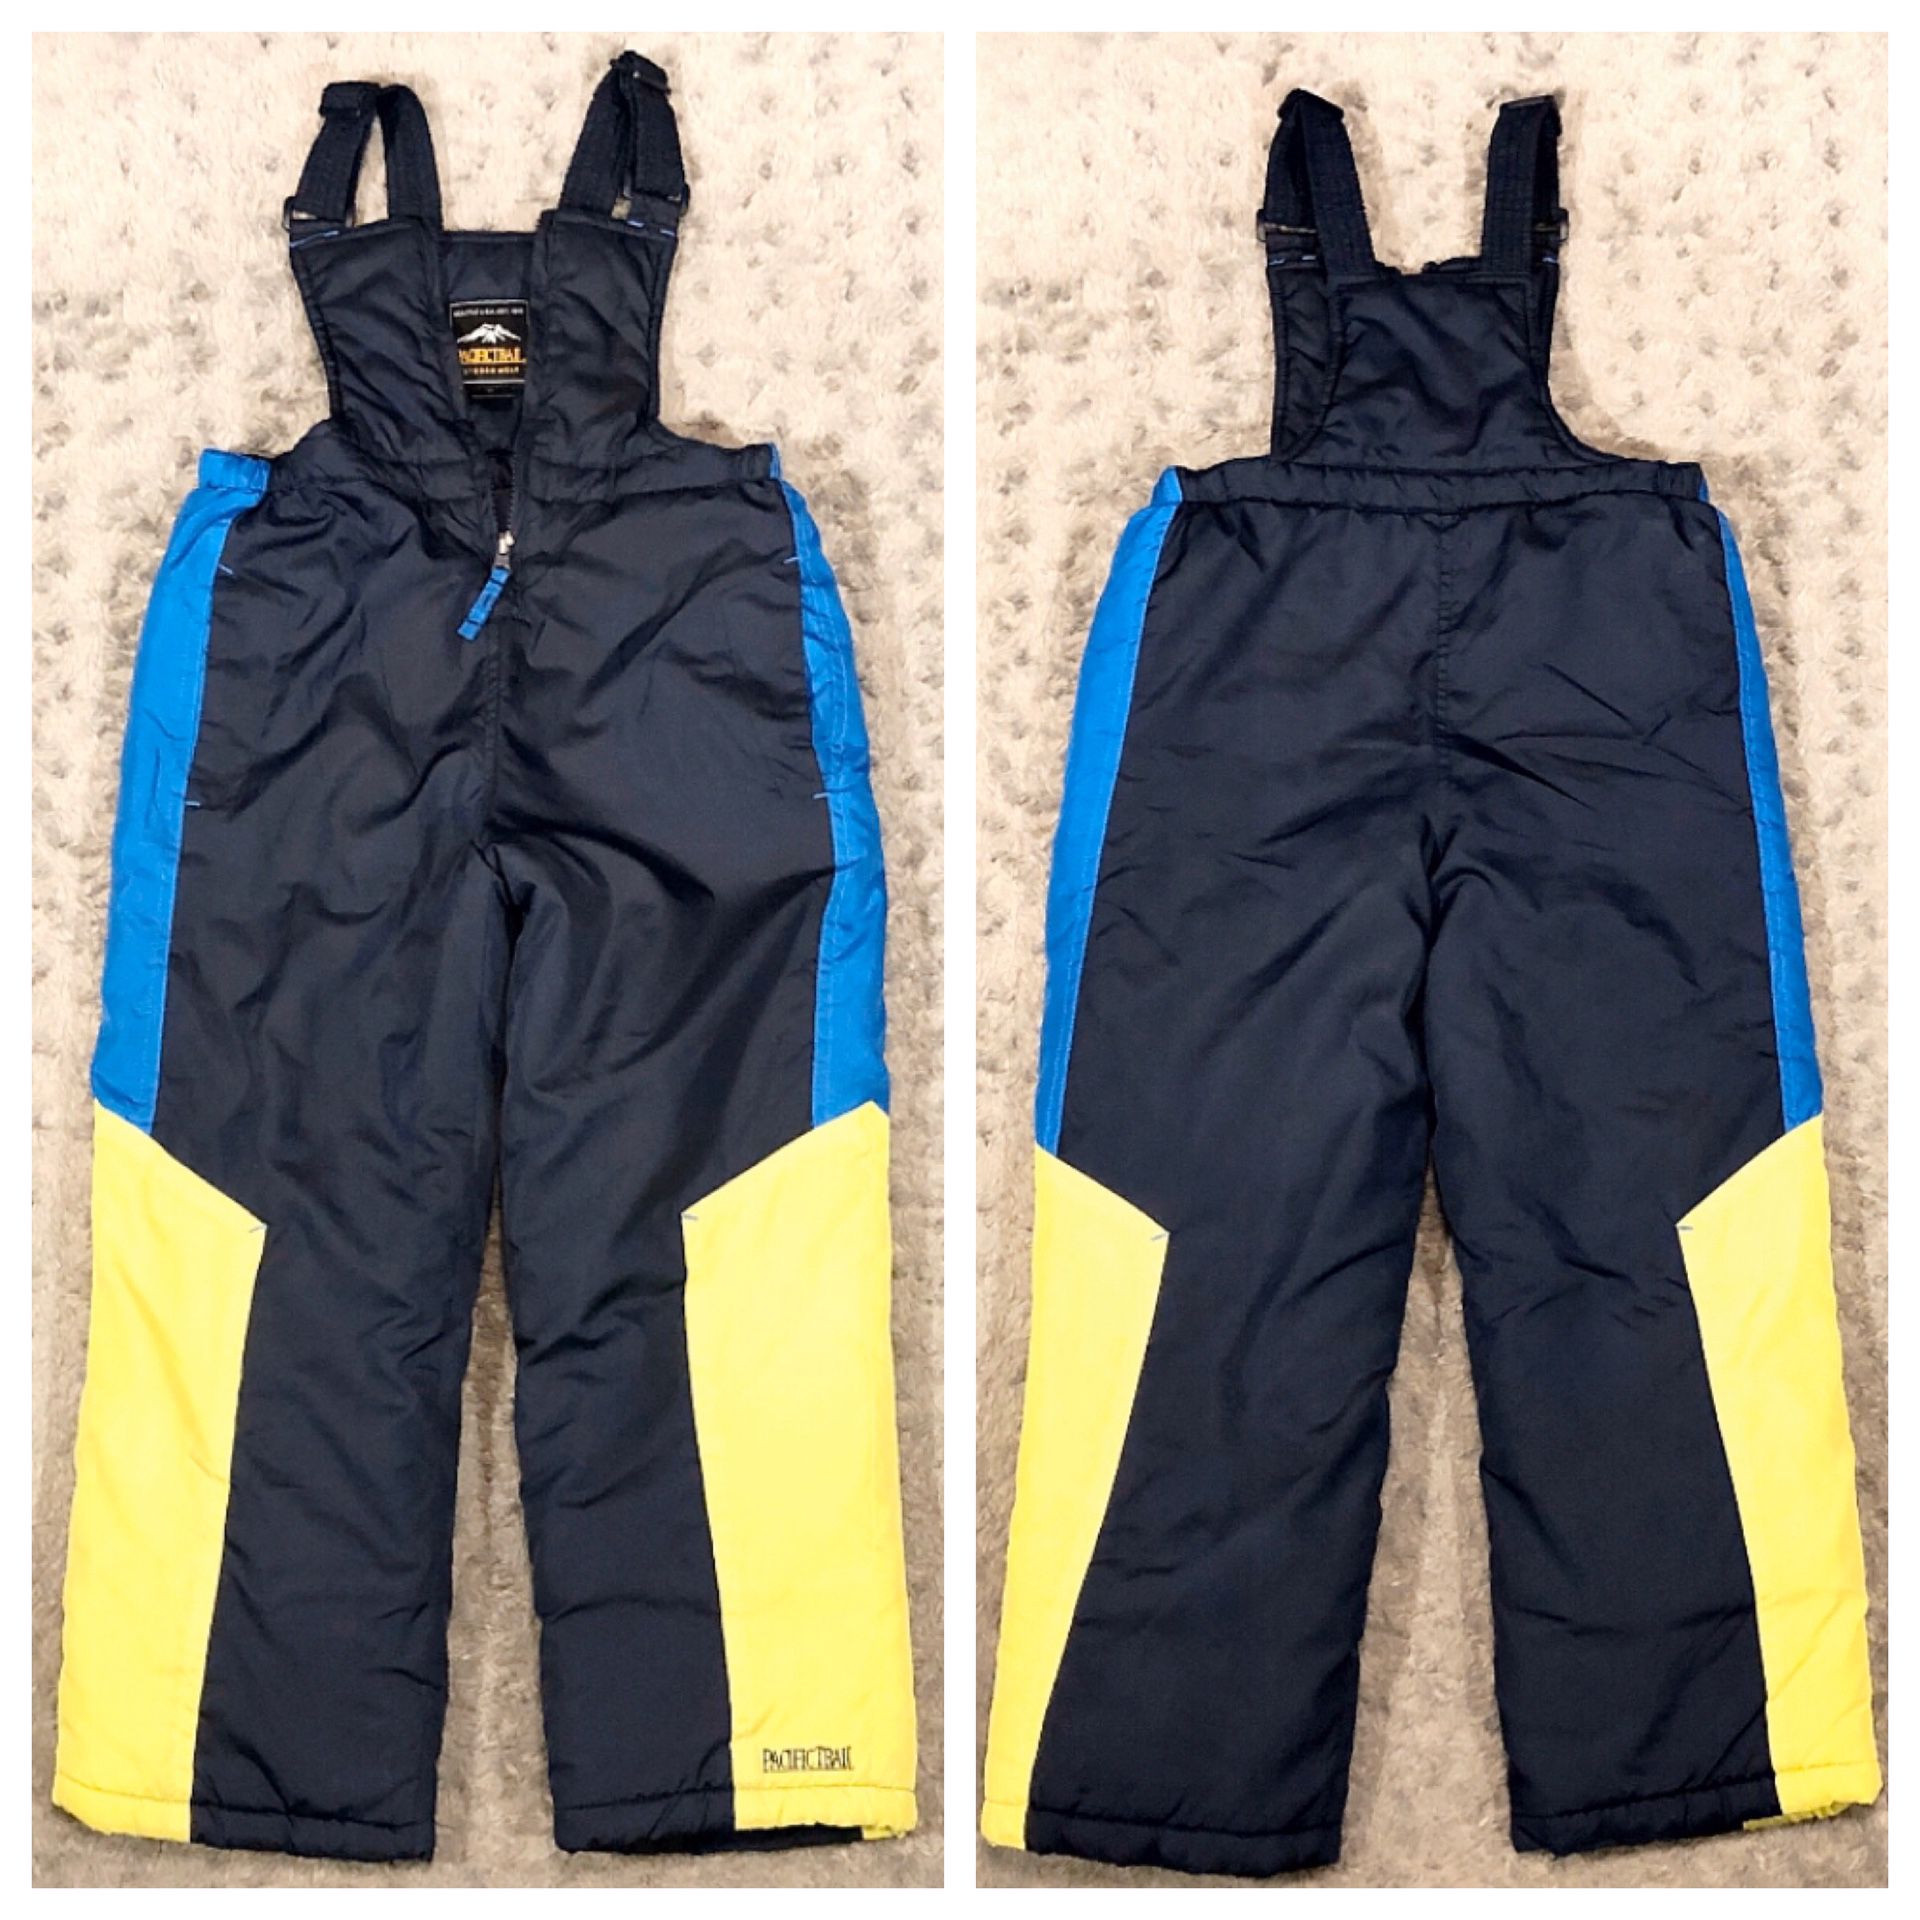 New! Toddler boy Pacific Trail snow suit Paid $30 5T New! Never worn! Snow suit with adjustable straps super warm.